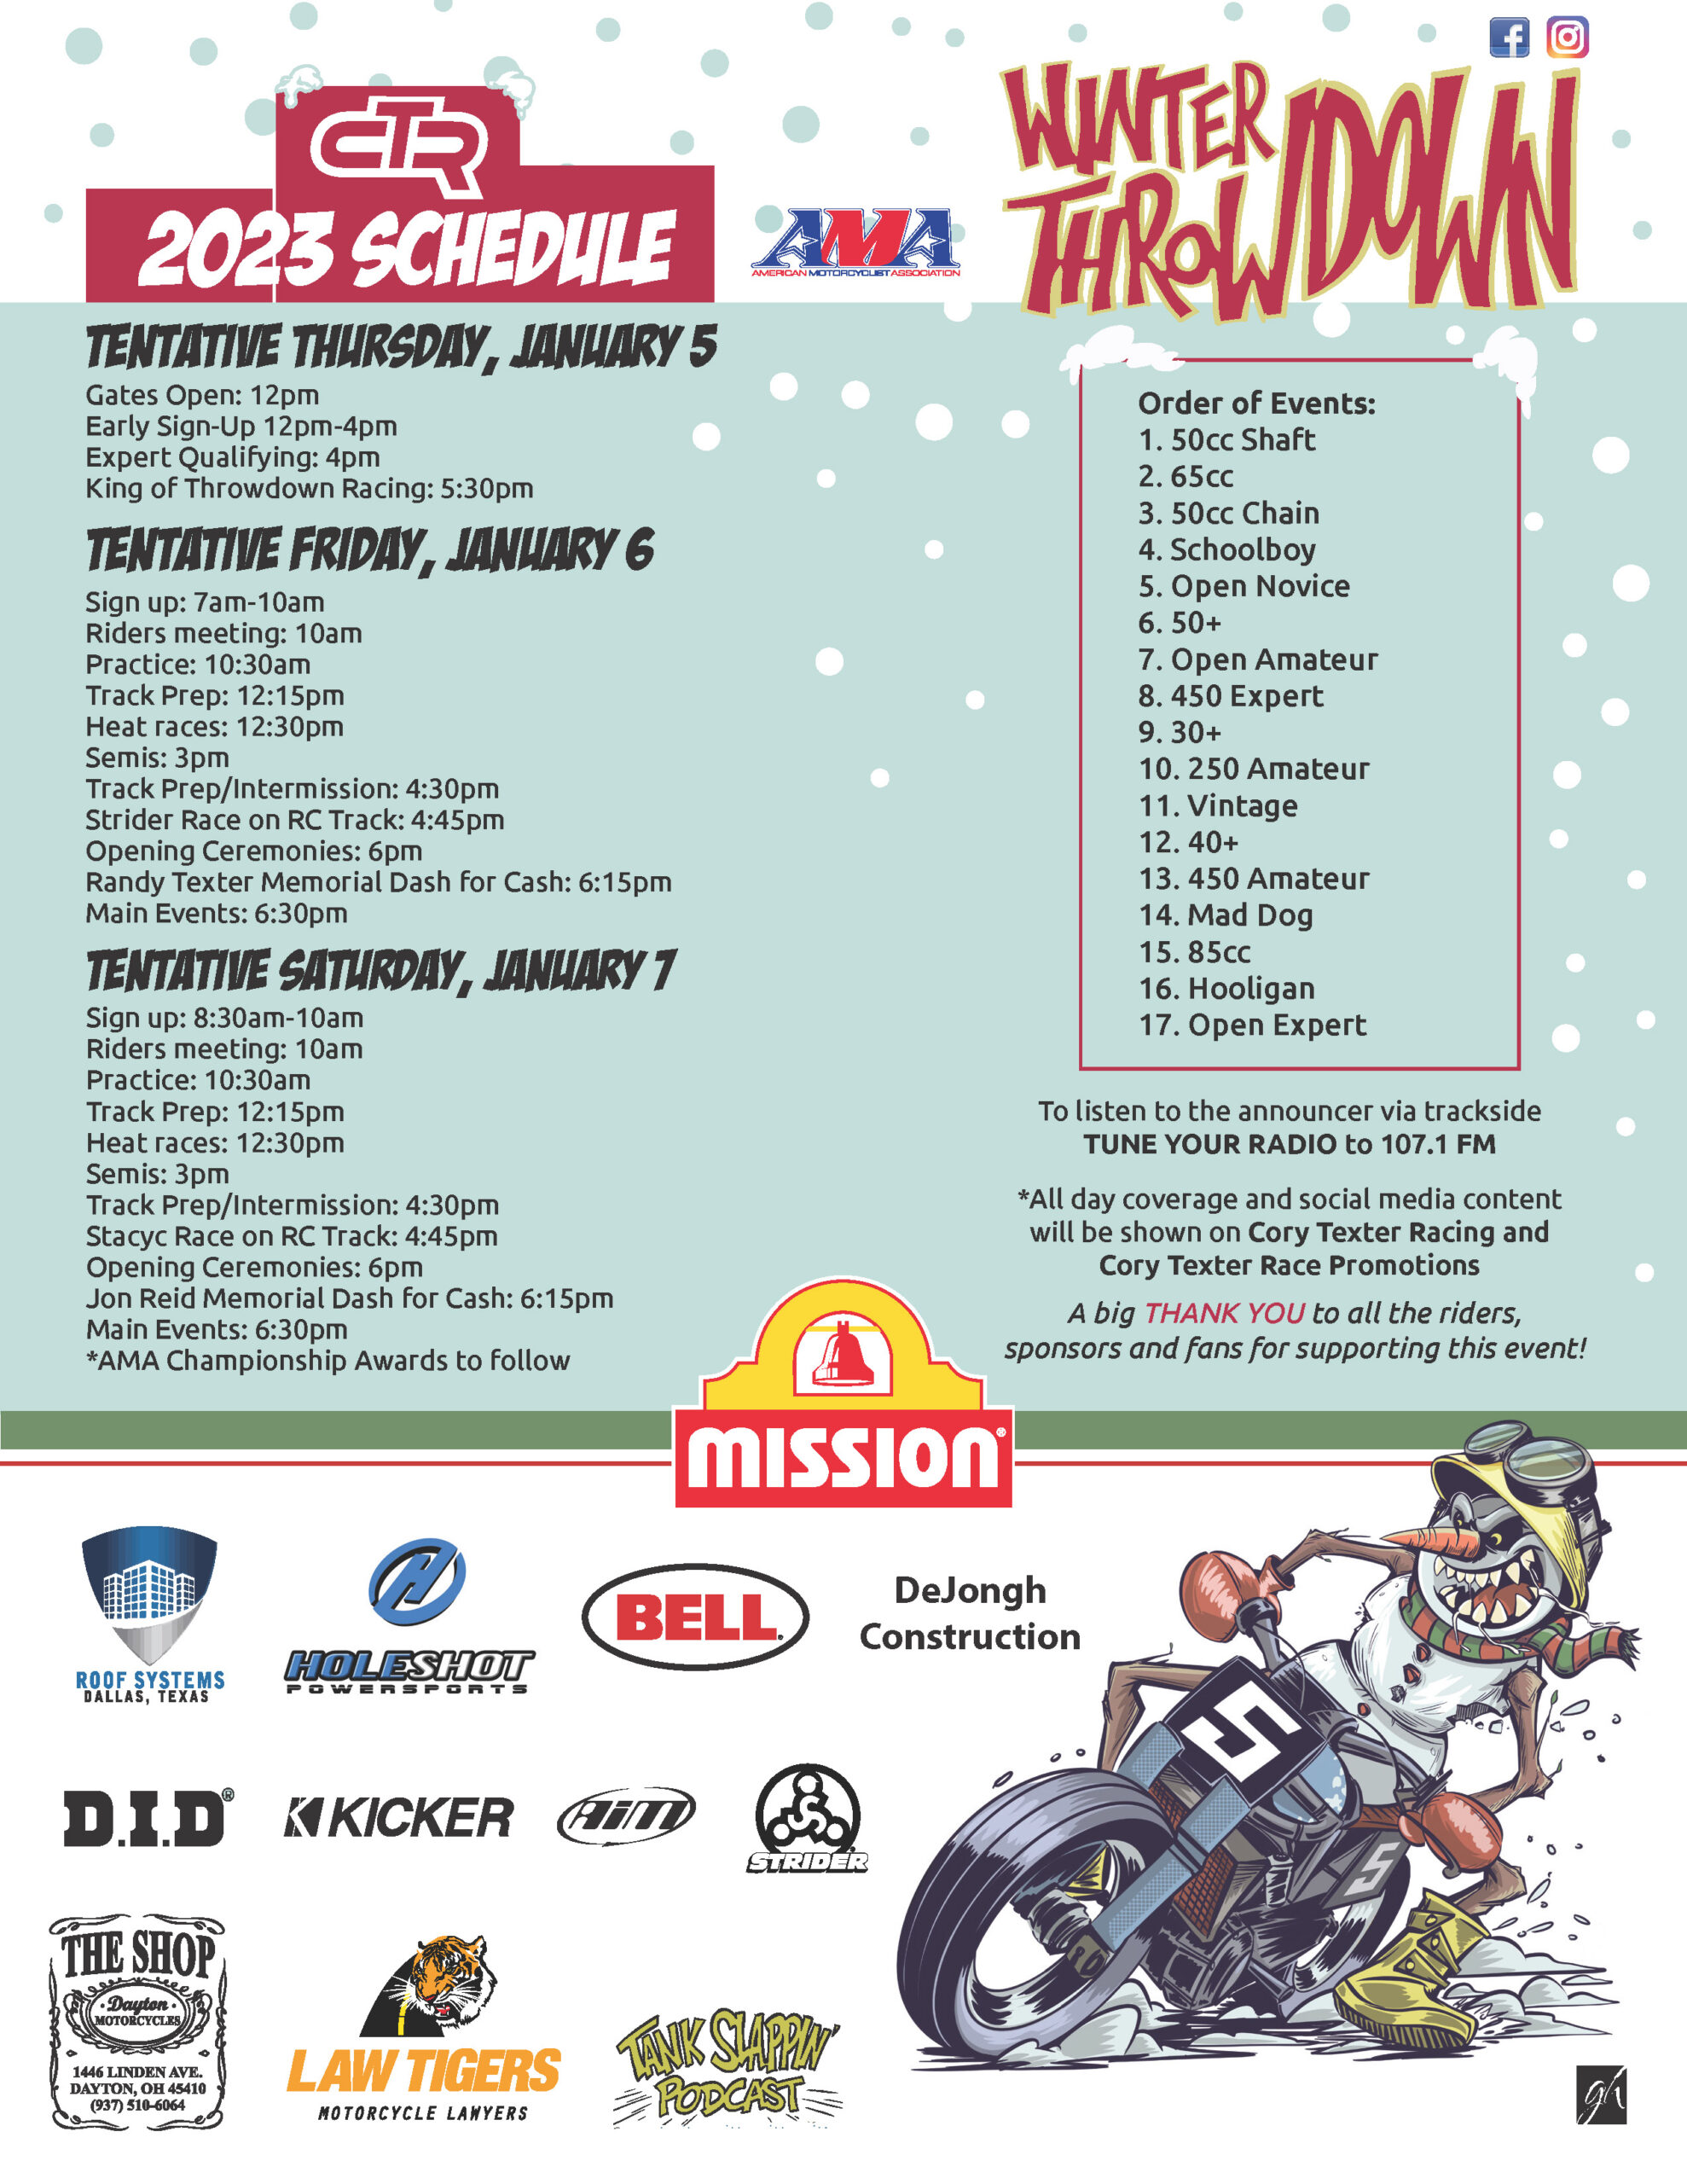 Winter Throwdown Race Info Cory Texter Promotions Flat Track Race